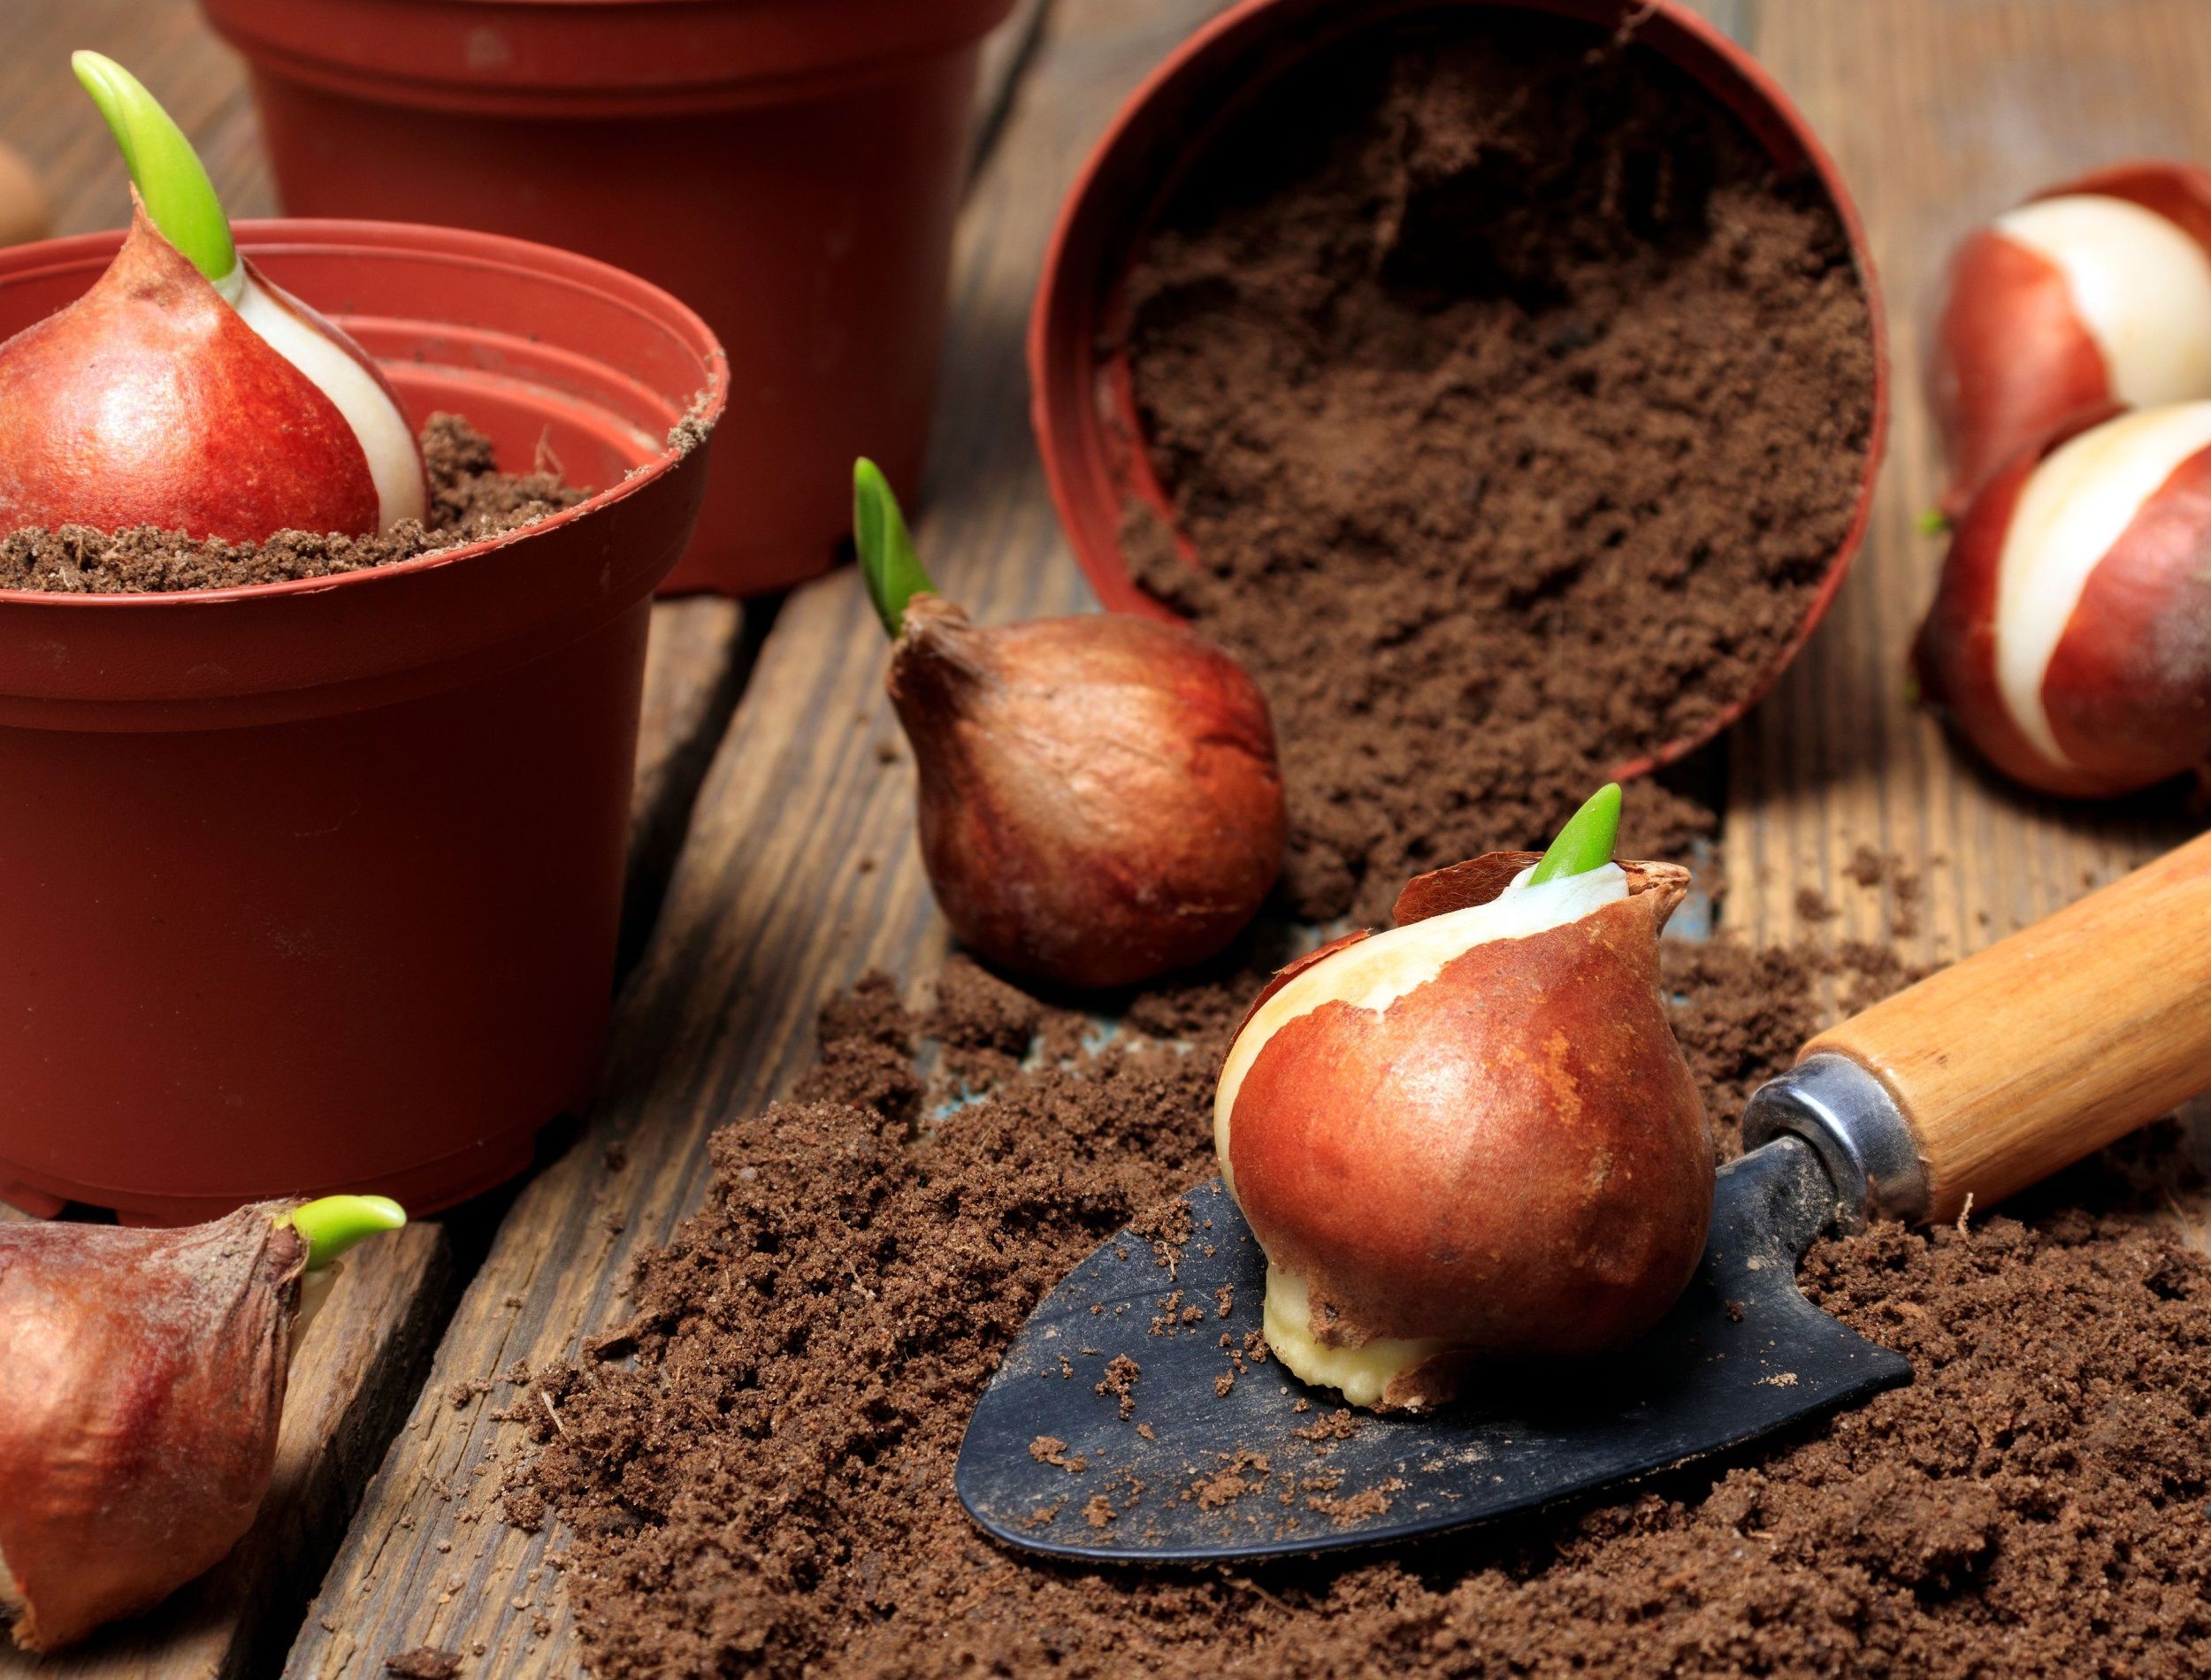 Pots, garden tools and tulip bulbs on a wooden table. Planting seedlings in containers.